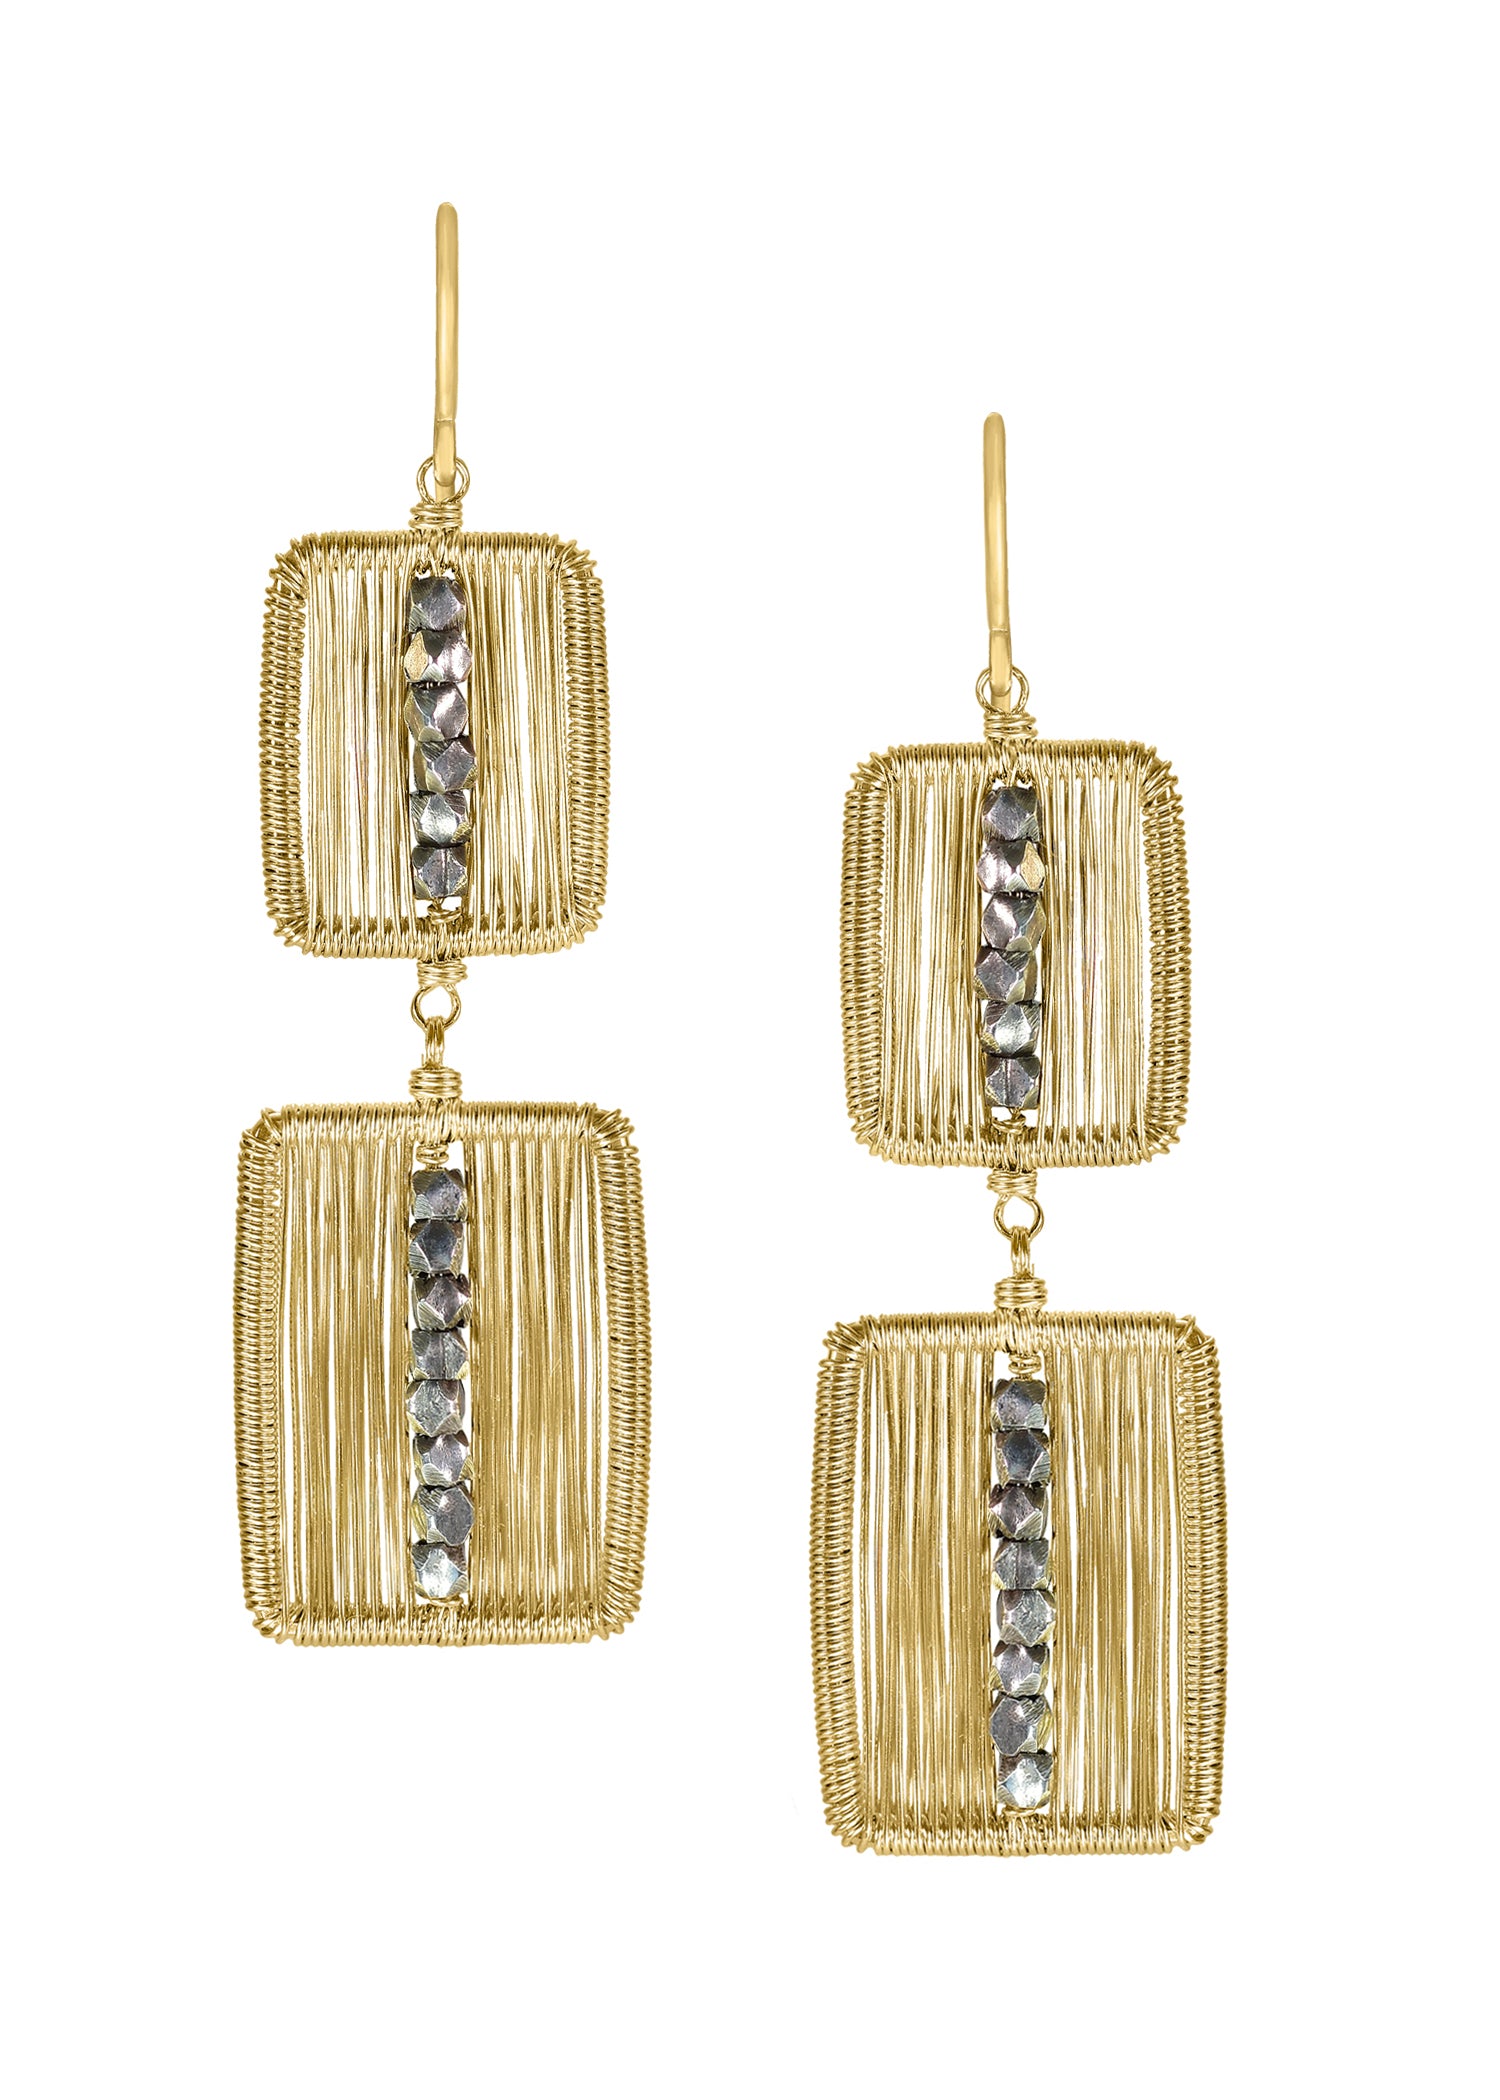 14k gold fill Sterling silver Earrings measure 2" in length (including the ear wires) and 9/16" in width at the widest point Handmade in our Los Angeles studio